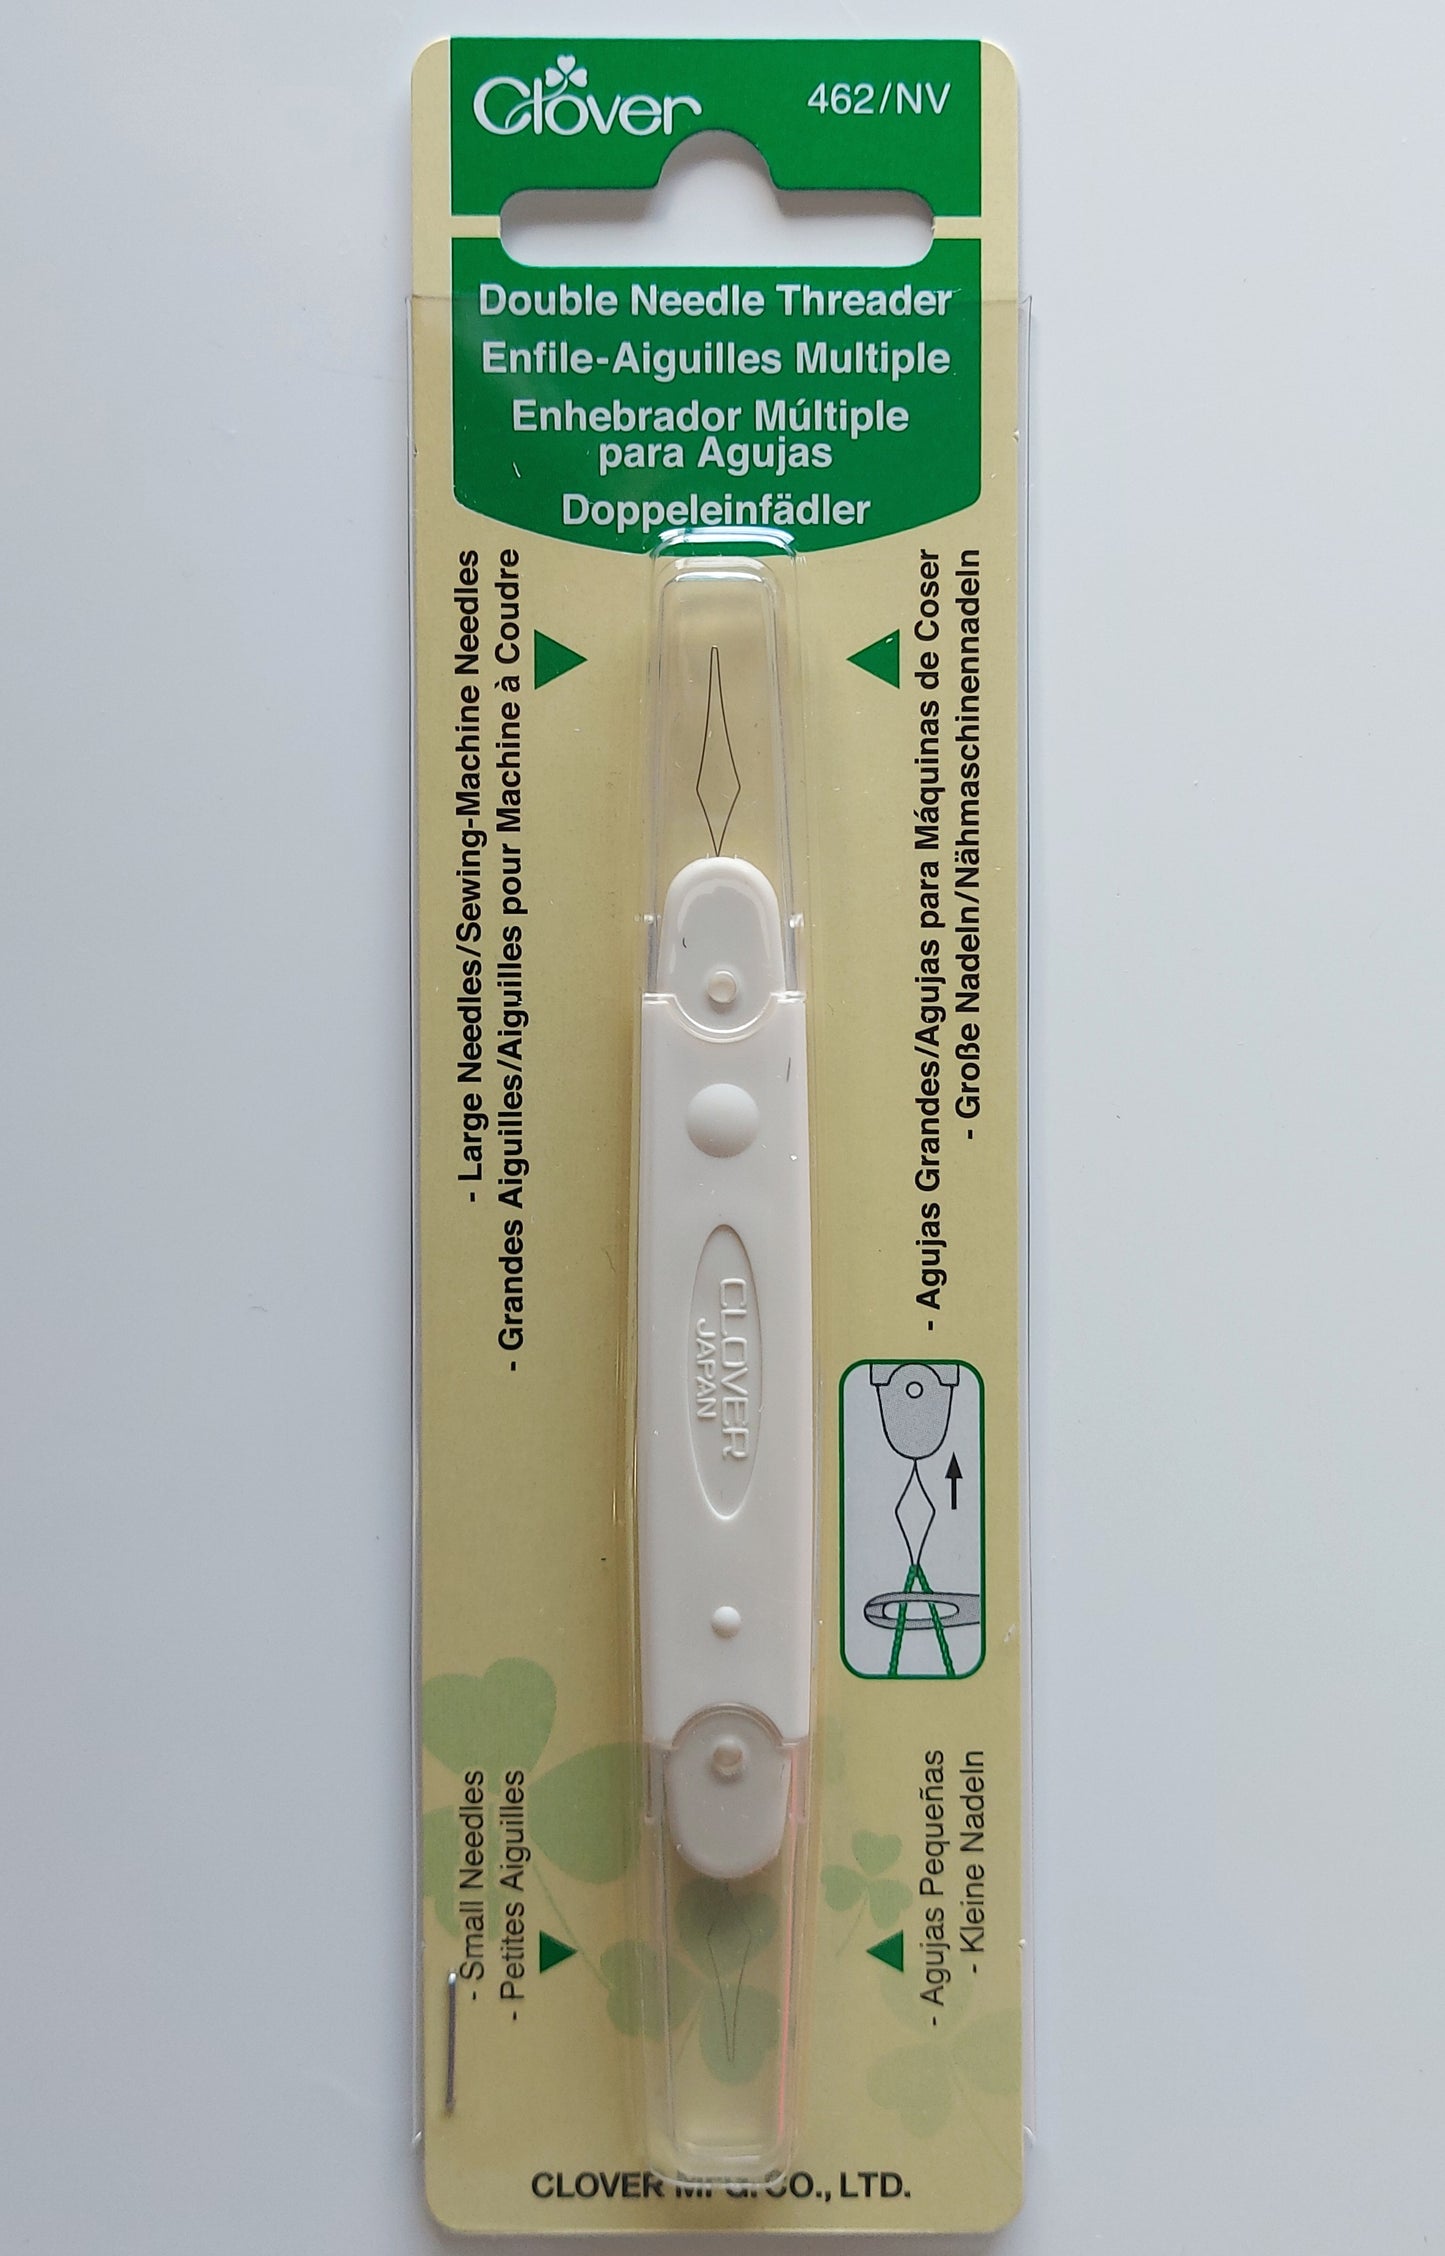 Clover double needle threader for hand and machine sewing needles